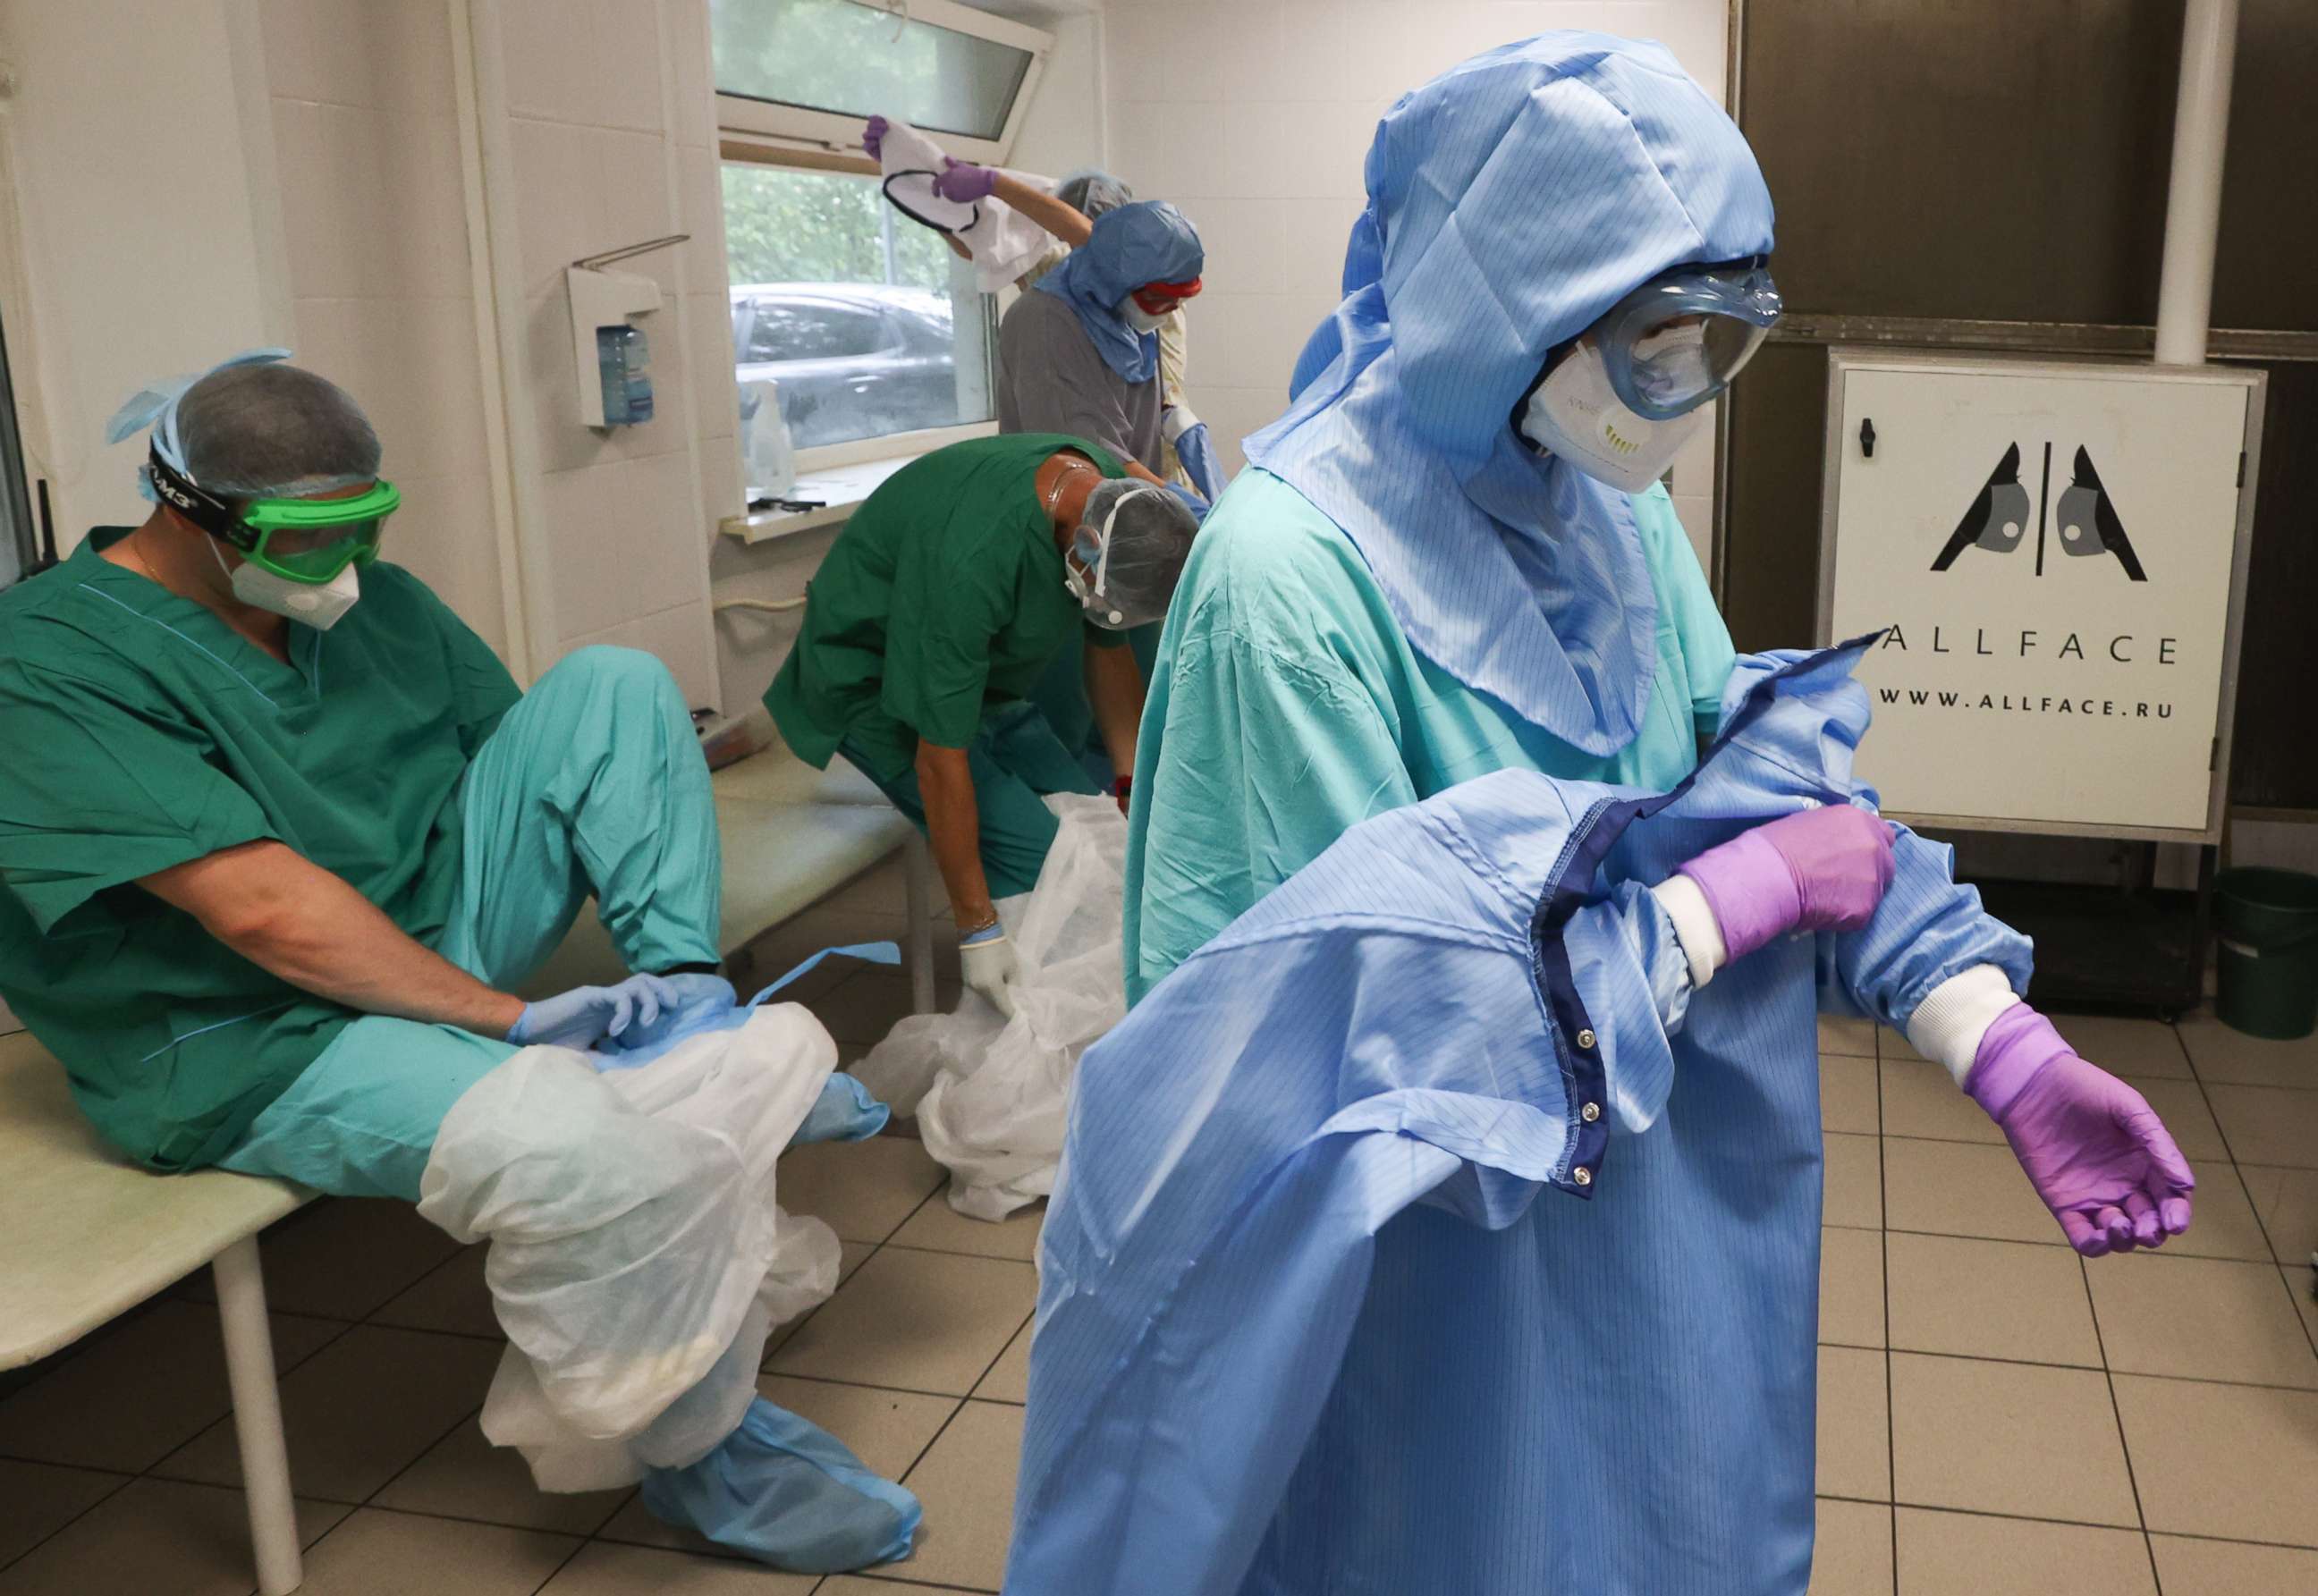 PHOTO: Medical workers take off their protective suits after working in the red zone at City Clinical Hospital No 15 (Filatov Hospital) in Moscow, Russia, July 19, 2021.